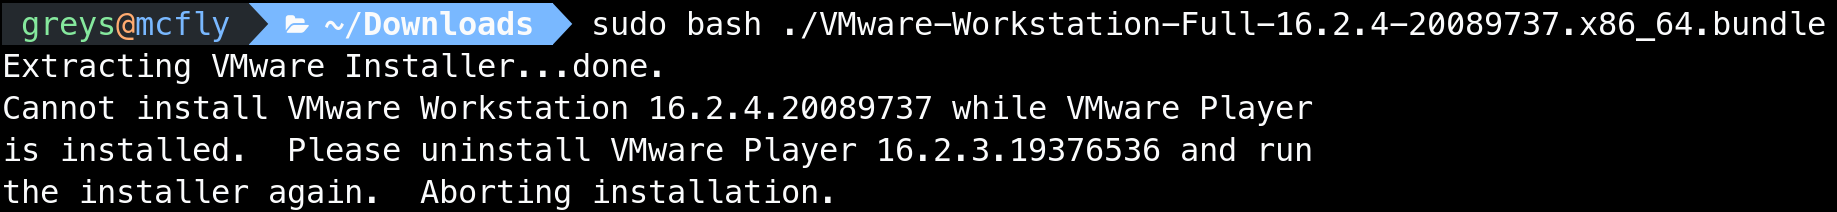 Successful VMware Workstation install in Linux Mint